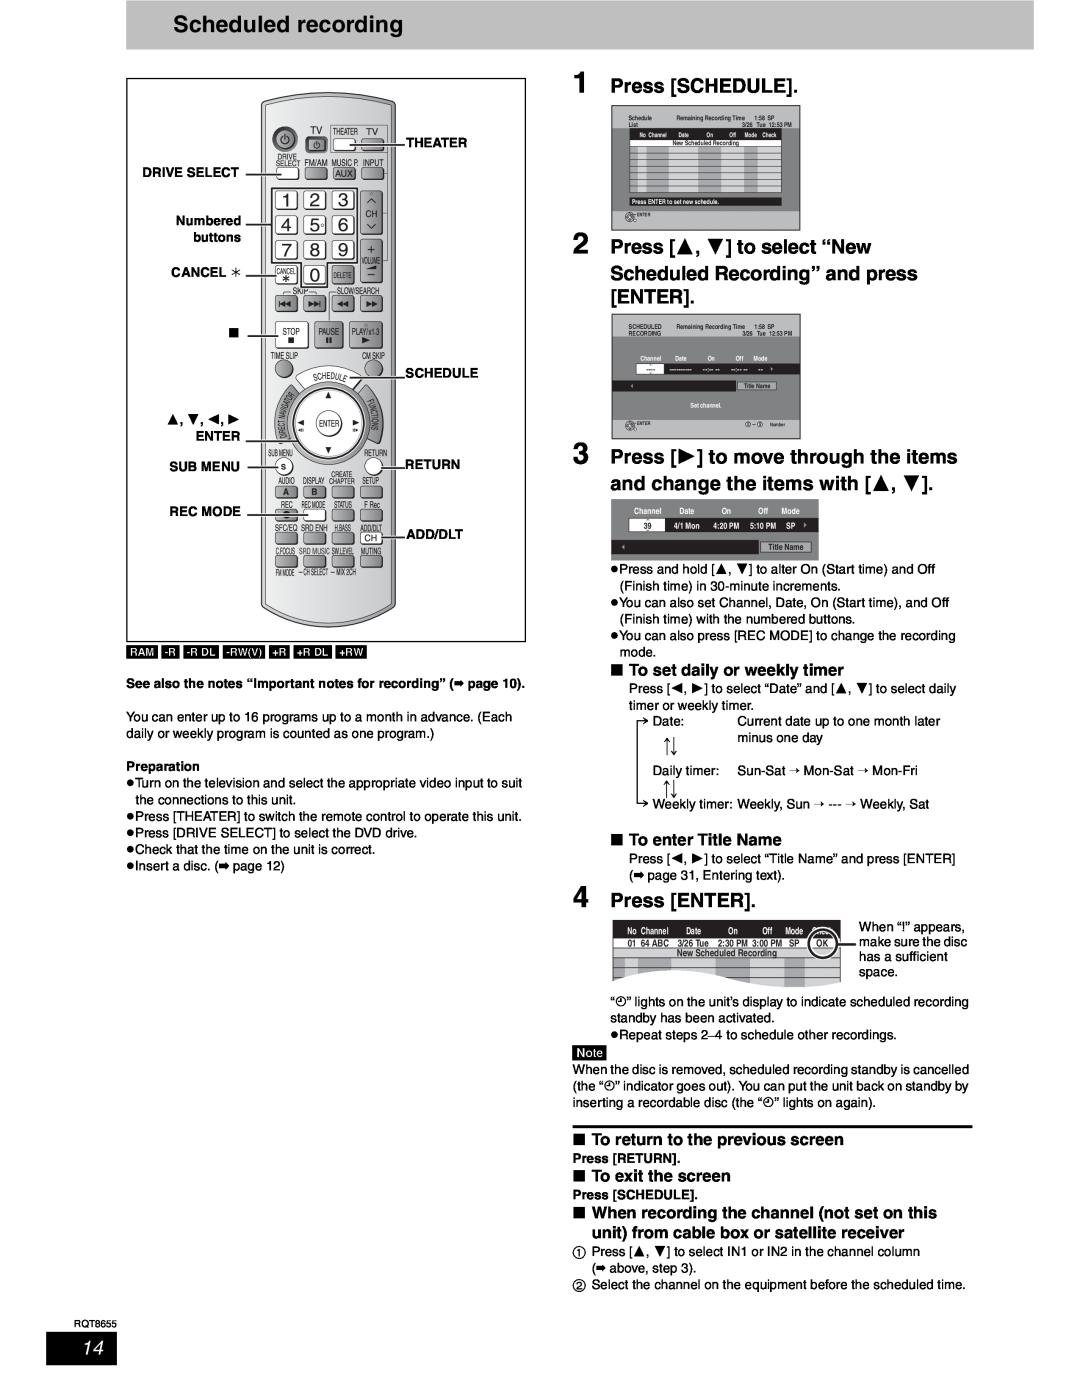 Panasonic SC-RT50 Scheduled recording, w To set daily or weekly timer, w To enter Title Name, w To exit the screen, space 